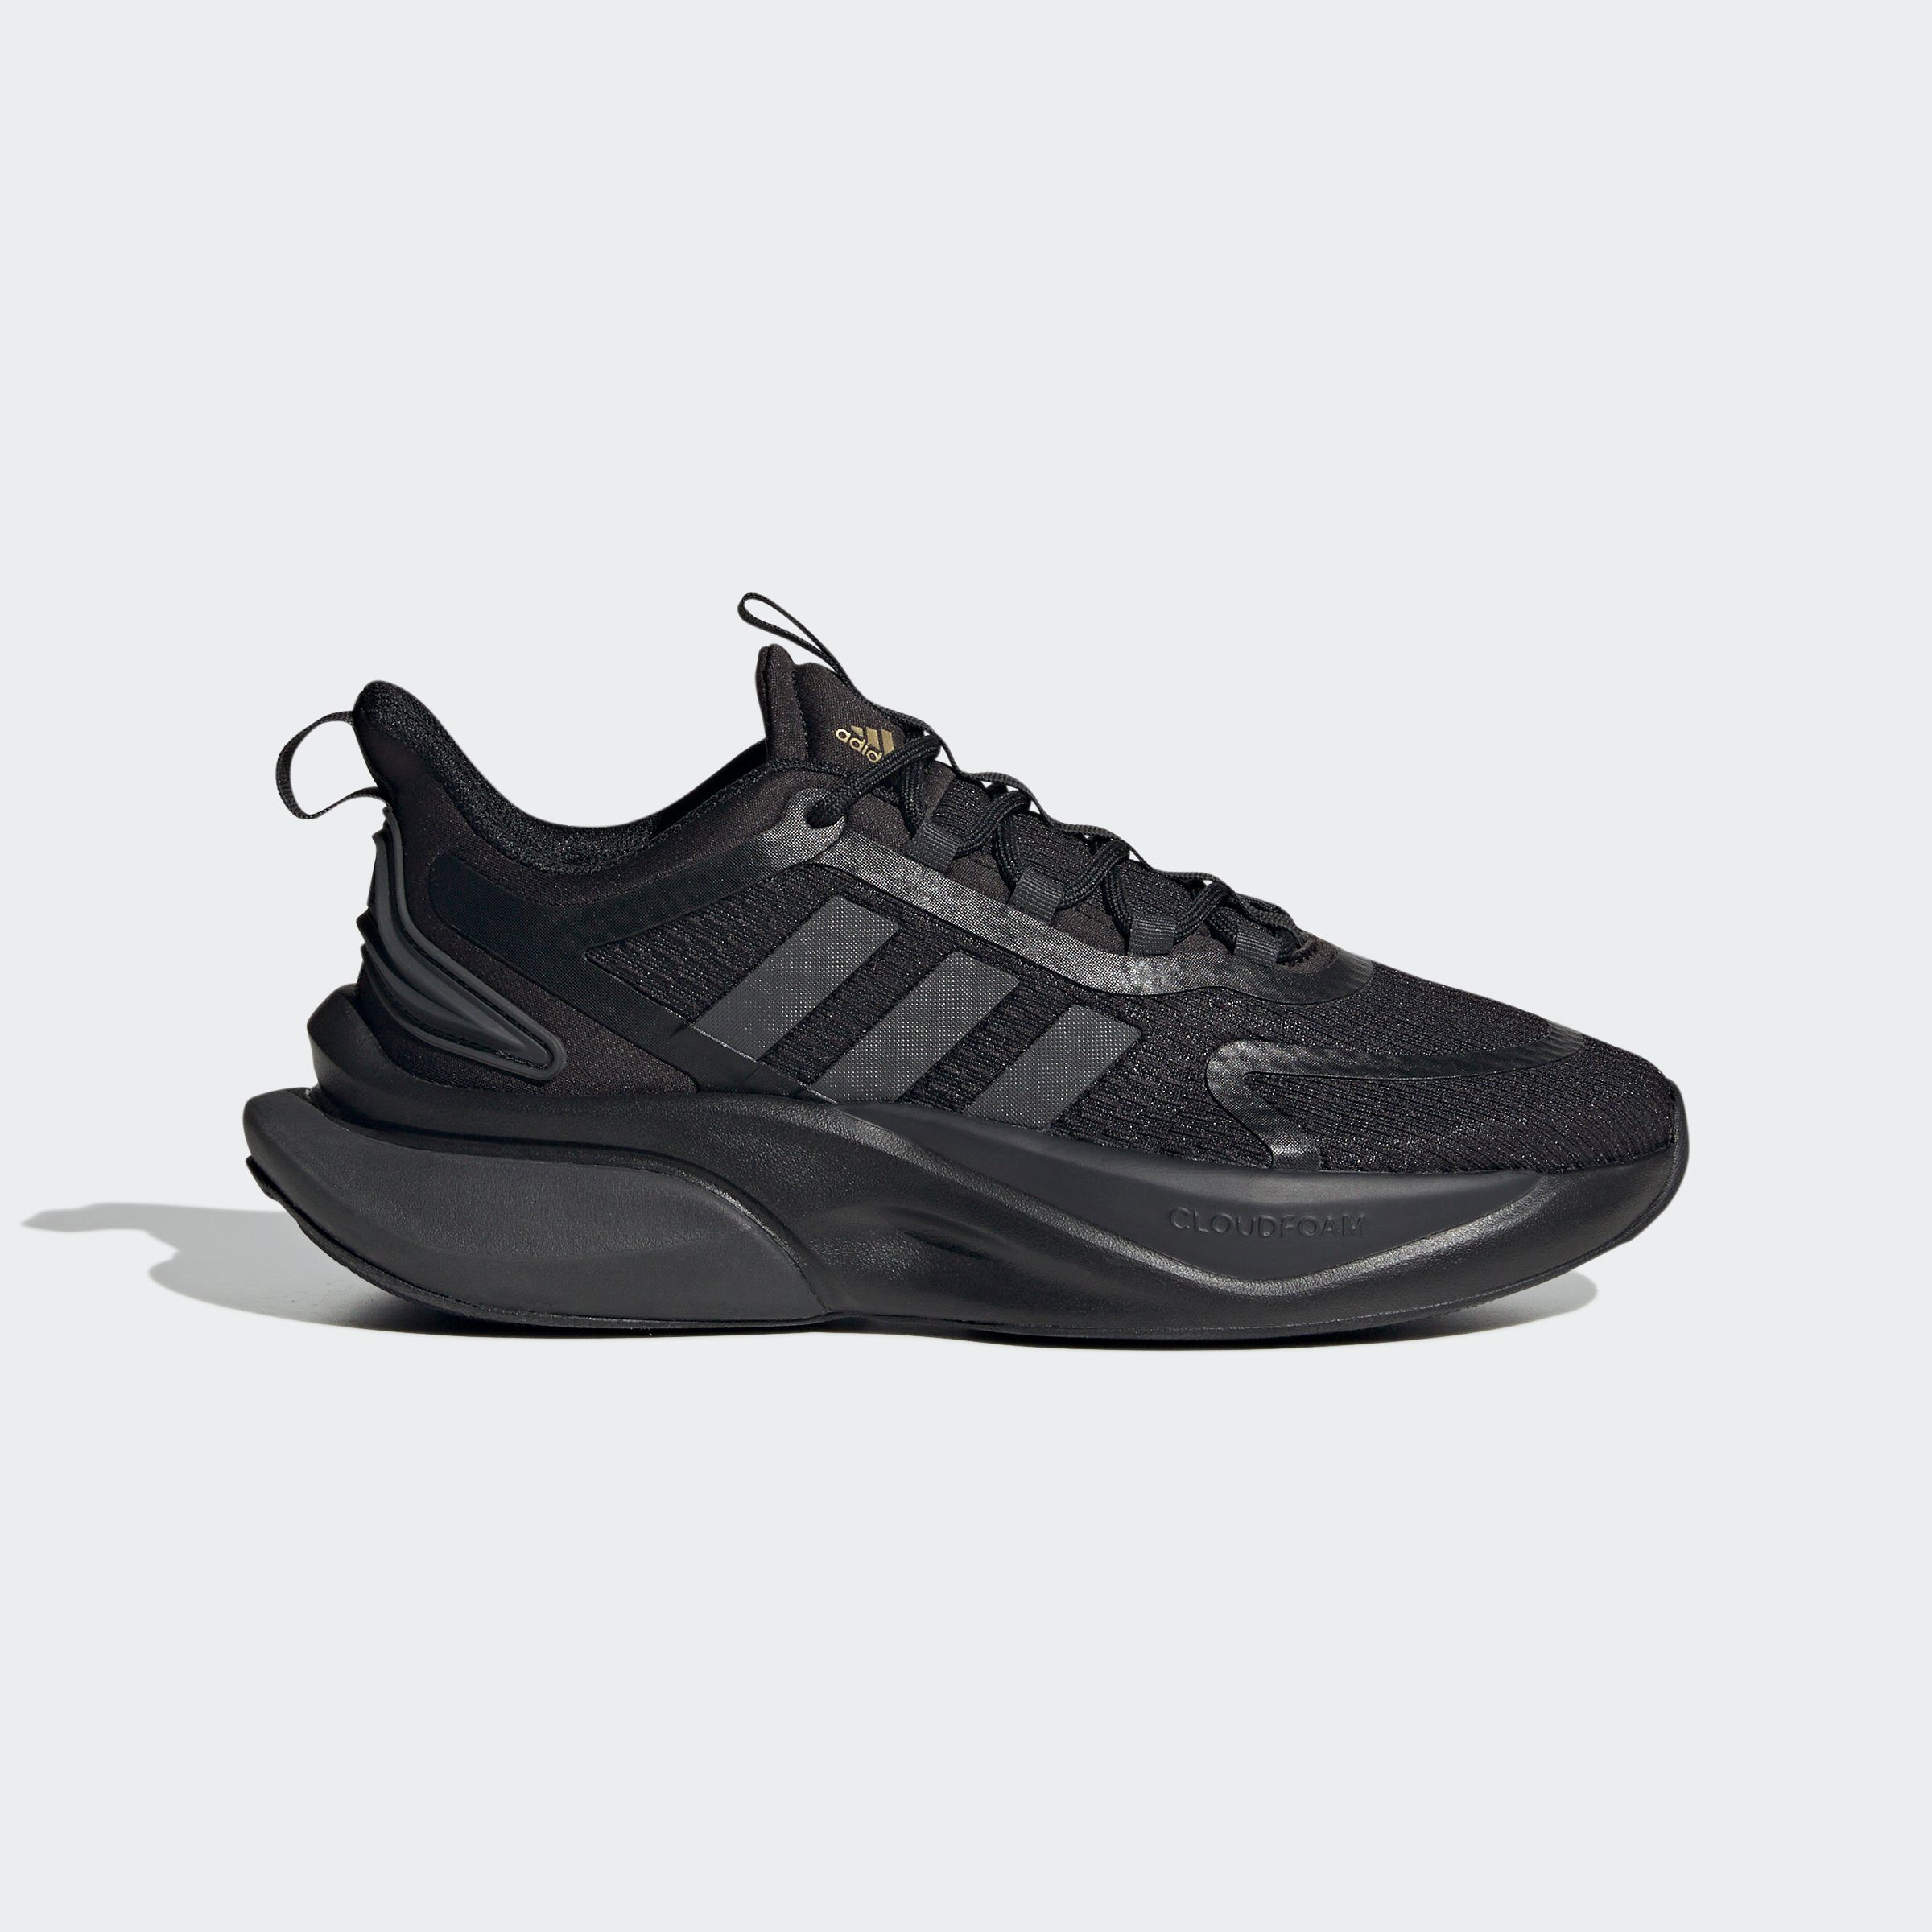 adidas Sportswear ALPHABOUNCE+ / Metallic Gold Core Sneaker Carbon BOUNCE / Black SUSTAINABLE